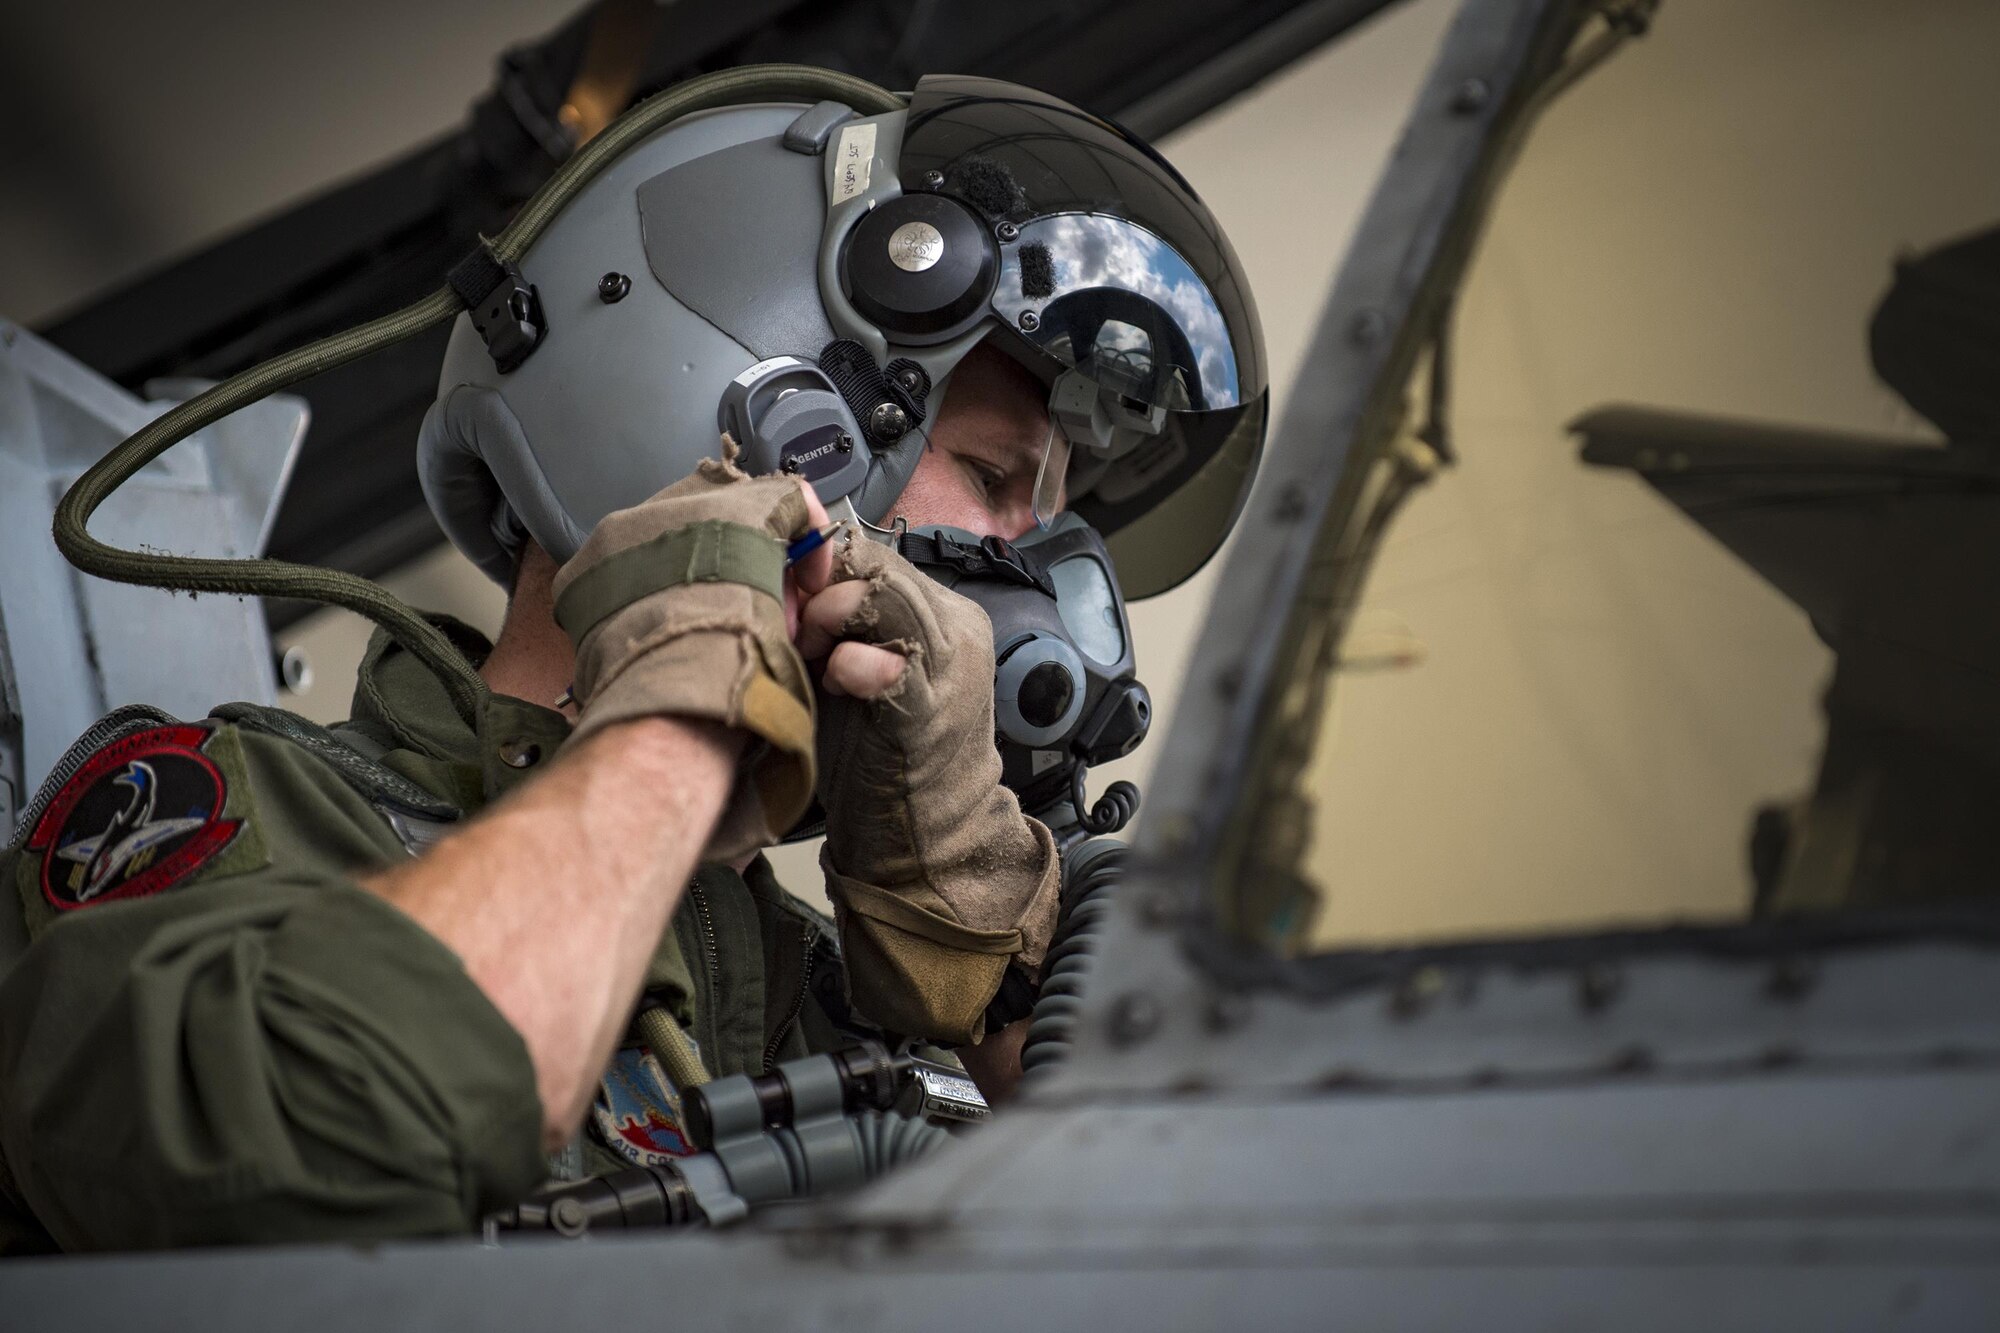 An A-10C Thunderbolt II pilot from the 75th Fighter Squadron fastens his helmet prior to take off, April 28, 2017, at Moody Air Force Base, Ga. The 75th FS departed for Combat Hammer, an air-to-ground exercise hosted at Hill Air Force Base, Utah. The exercise is designed to collect and analyze data on the performance of precision weapons and measure their suitability for use in combat. (U.S. Air Force photo by Andrea Jenkins)